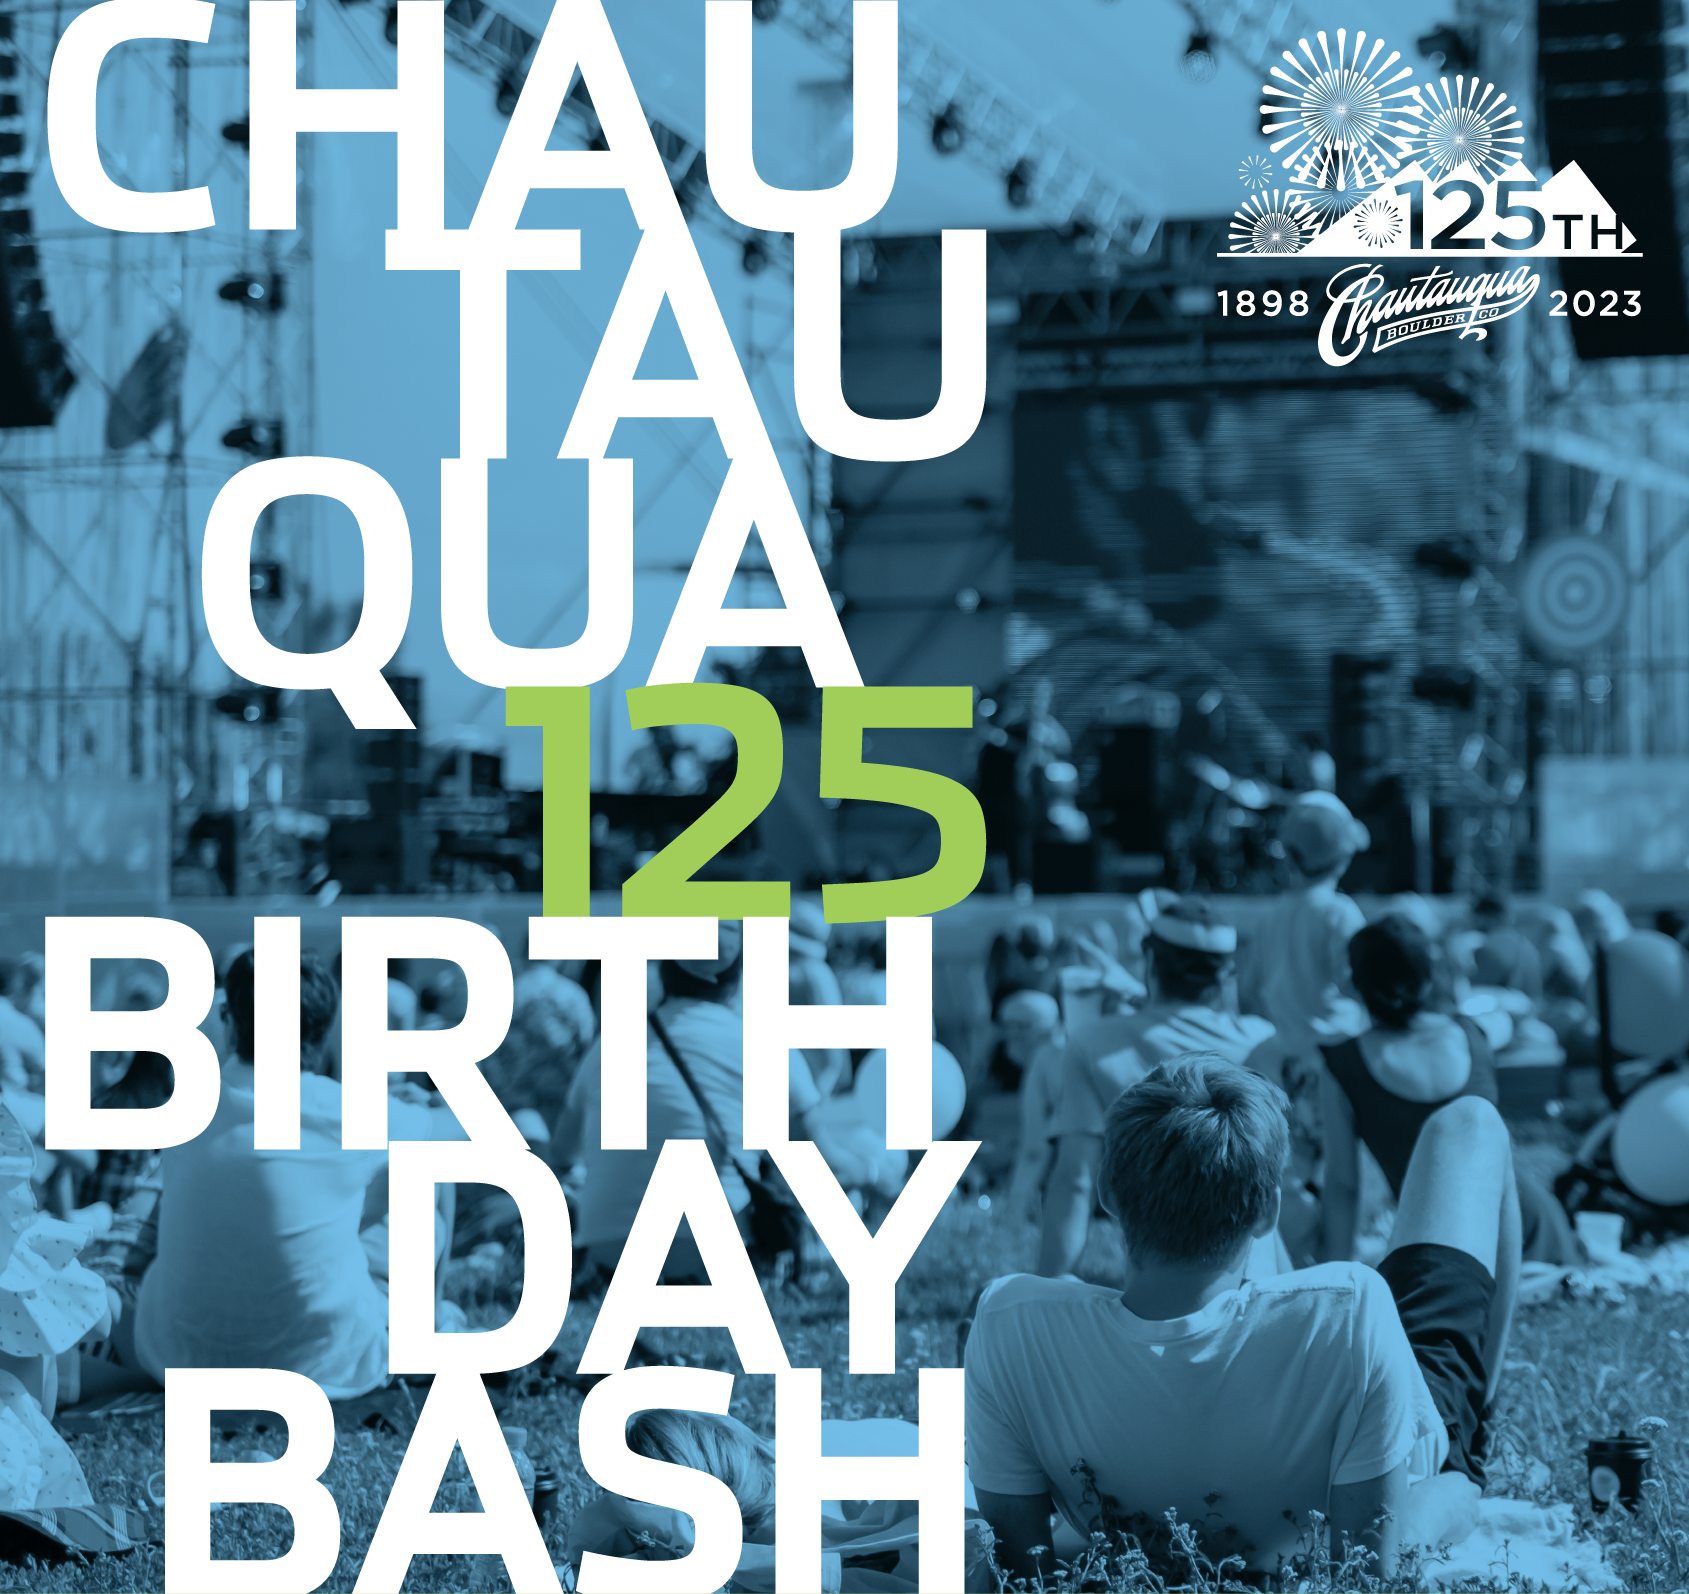 Chautauqua 125 Birthday Bash July 8 - Save the Date!FREE</p>
<p>Live Music<br />
Speakers<br />
Public Art<br />
Lawn Games<br />
Tours<br />
Photo Booth<br />
Historical Exhibits<br />
Artisan Market<br />
Food Trucks<br />
Beer Garden<br />
And much more! Ticketed<br />
Evening Concert in the Auditorium Sign up for our Newsletter<br />
or go to Chautauqua.com/125th<br />
for updates on our 125th Anniversary 